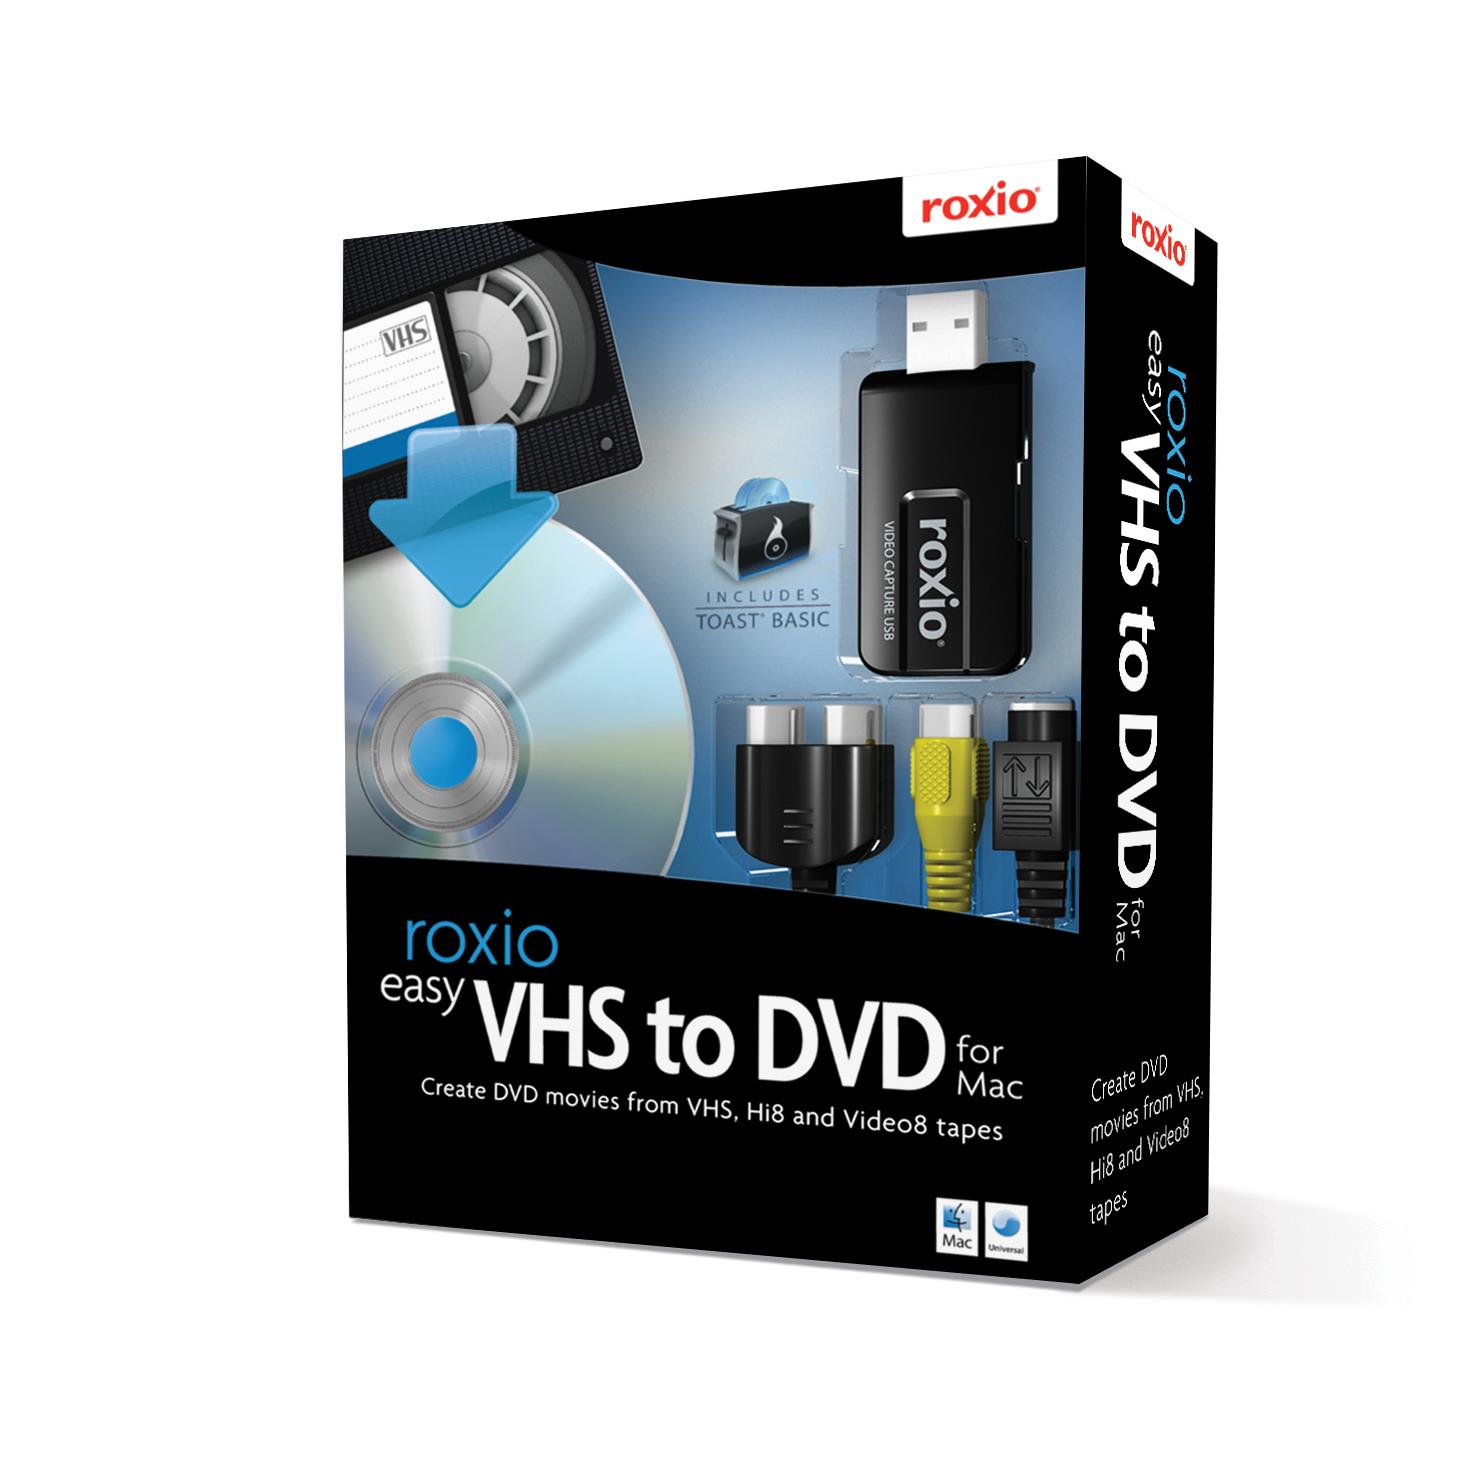 Video Capture Hardware For Mac Os X